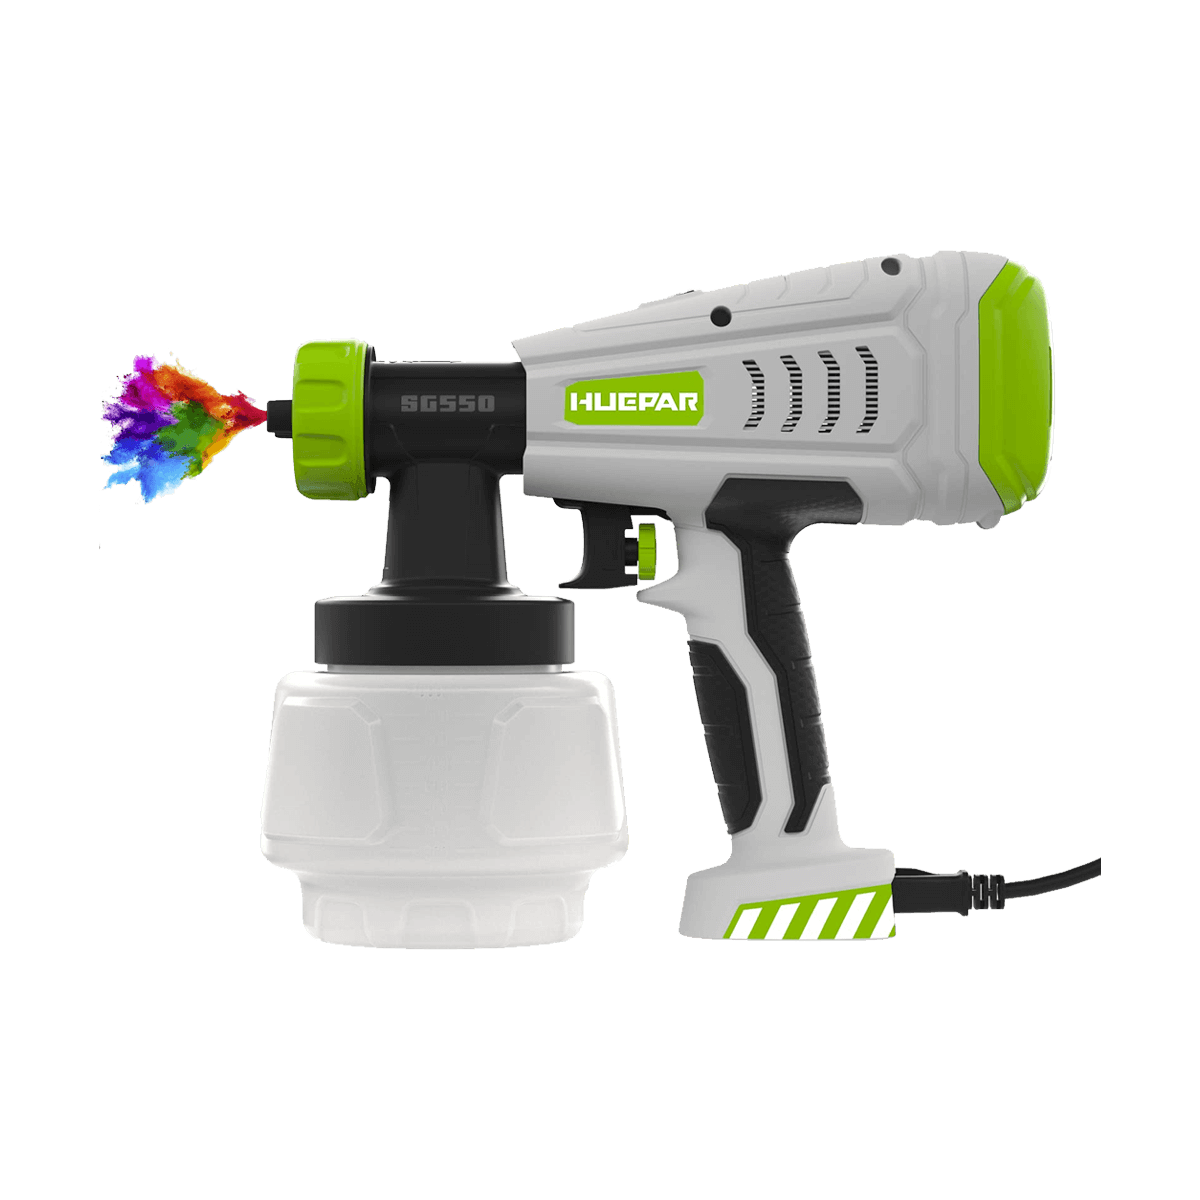 Huepar Tools SG550 HVLP electric paint sprayer with 1000ml capacity and 4 metal nozzles, 3 patterns for home interior and exterior walls, ceiling, cabinet, fence, and chair6